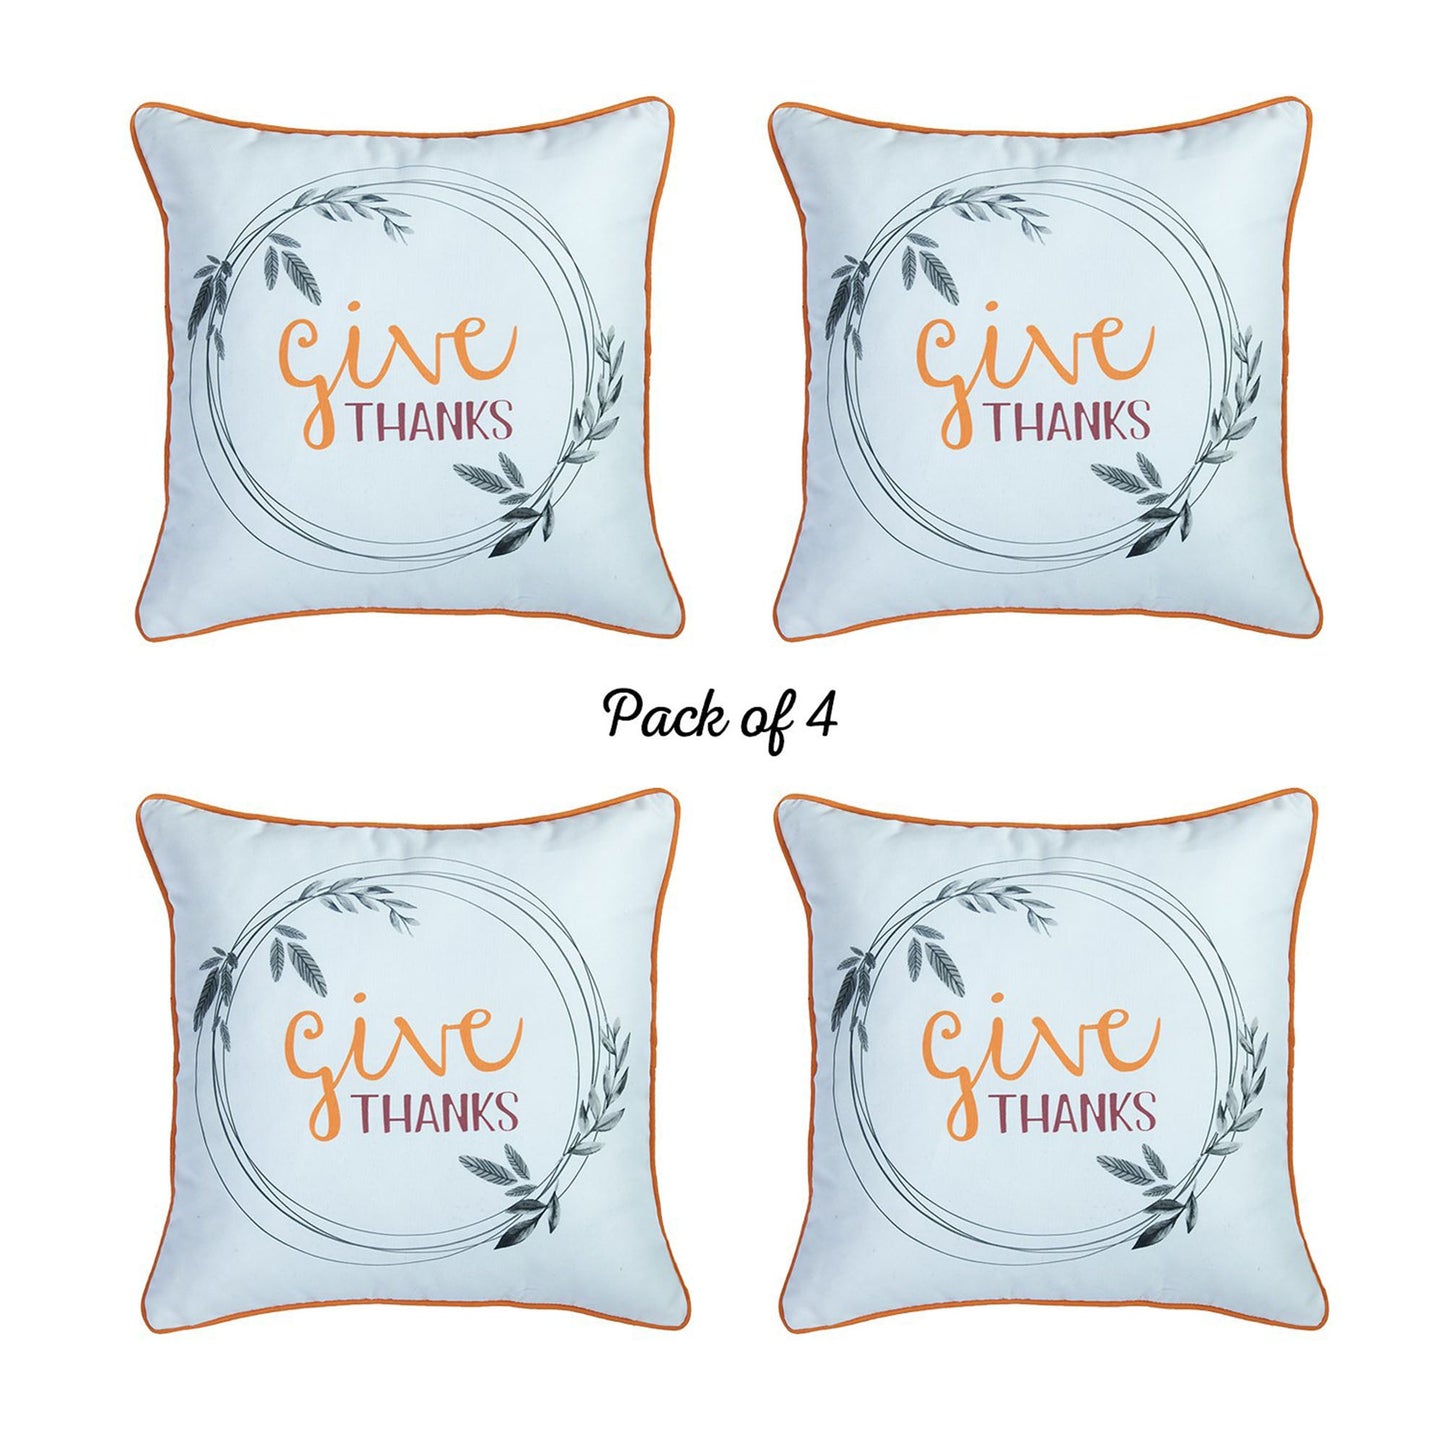 Decorative Fall Thanksgiving Throw Pillow Cover Set of 4 Quote 18" x 18" White & Orange Square for Couch, Bedding